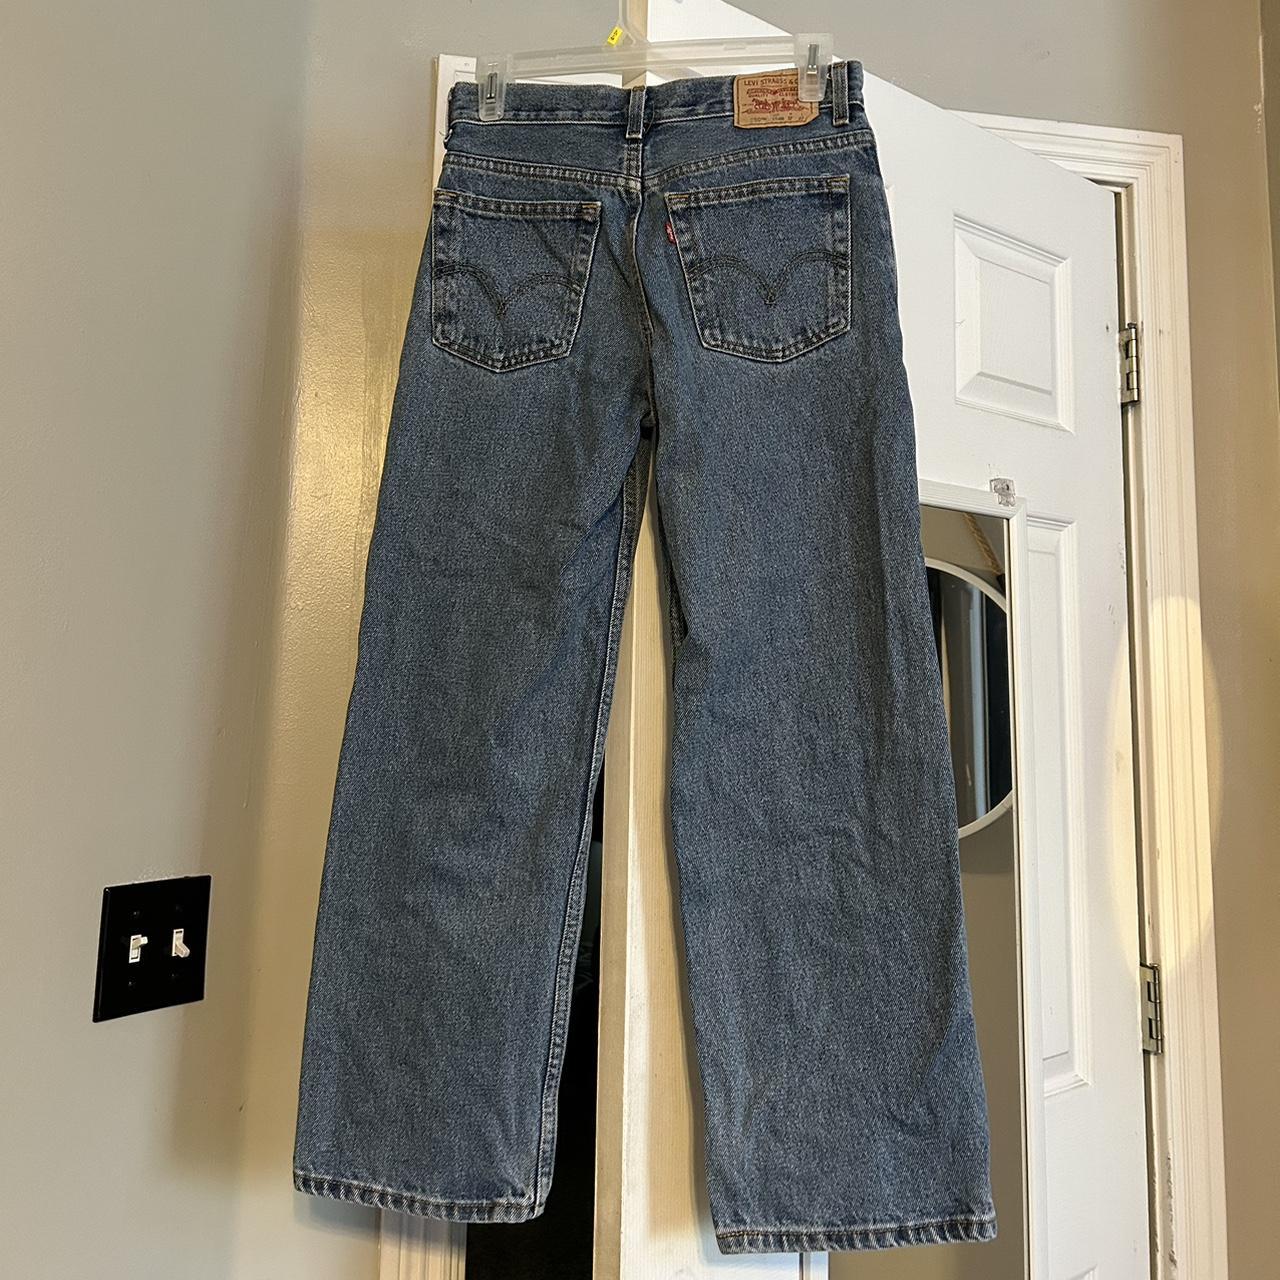 Vintage levis relaxed jeans 🔥 Style... - Depop